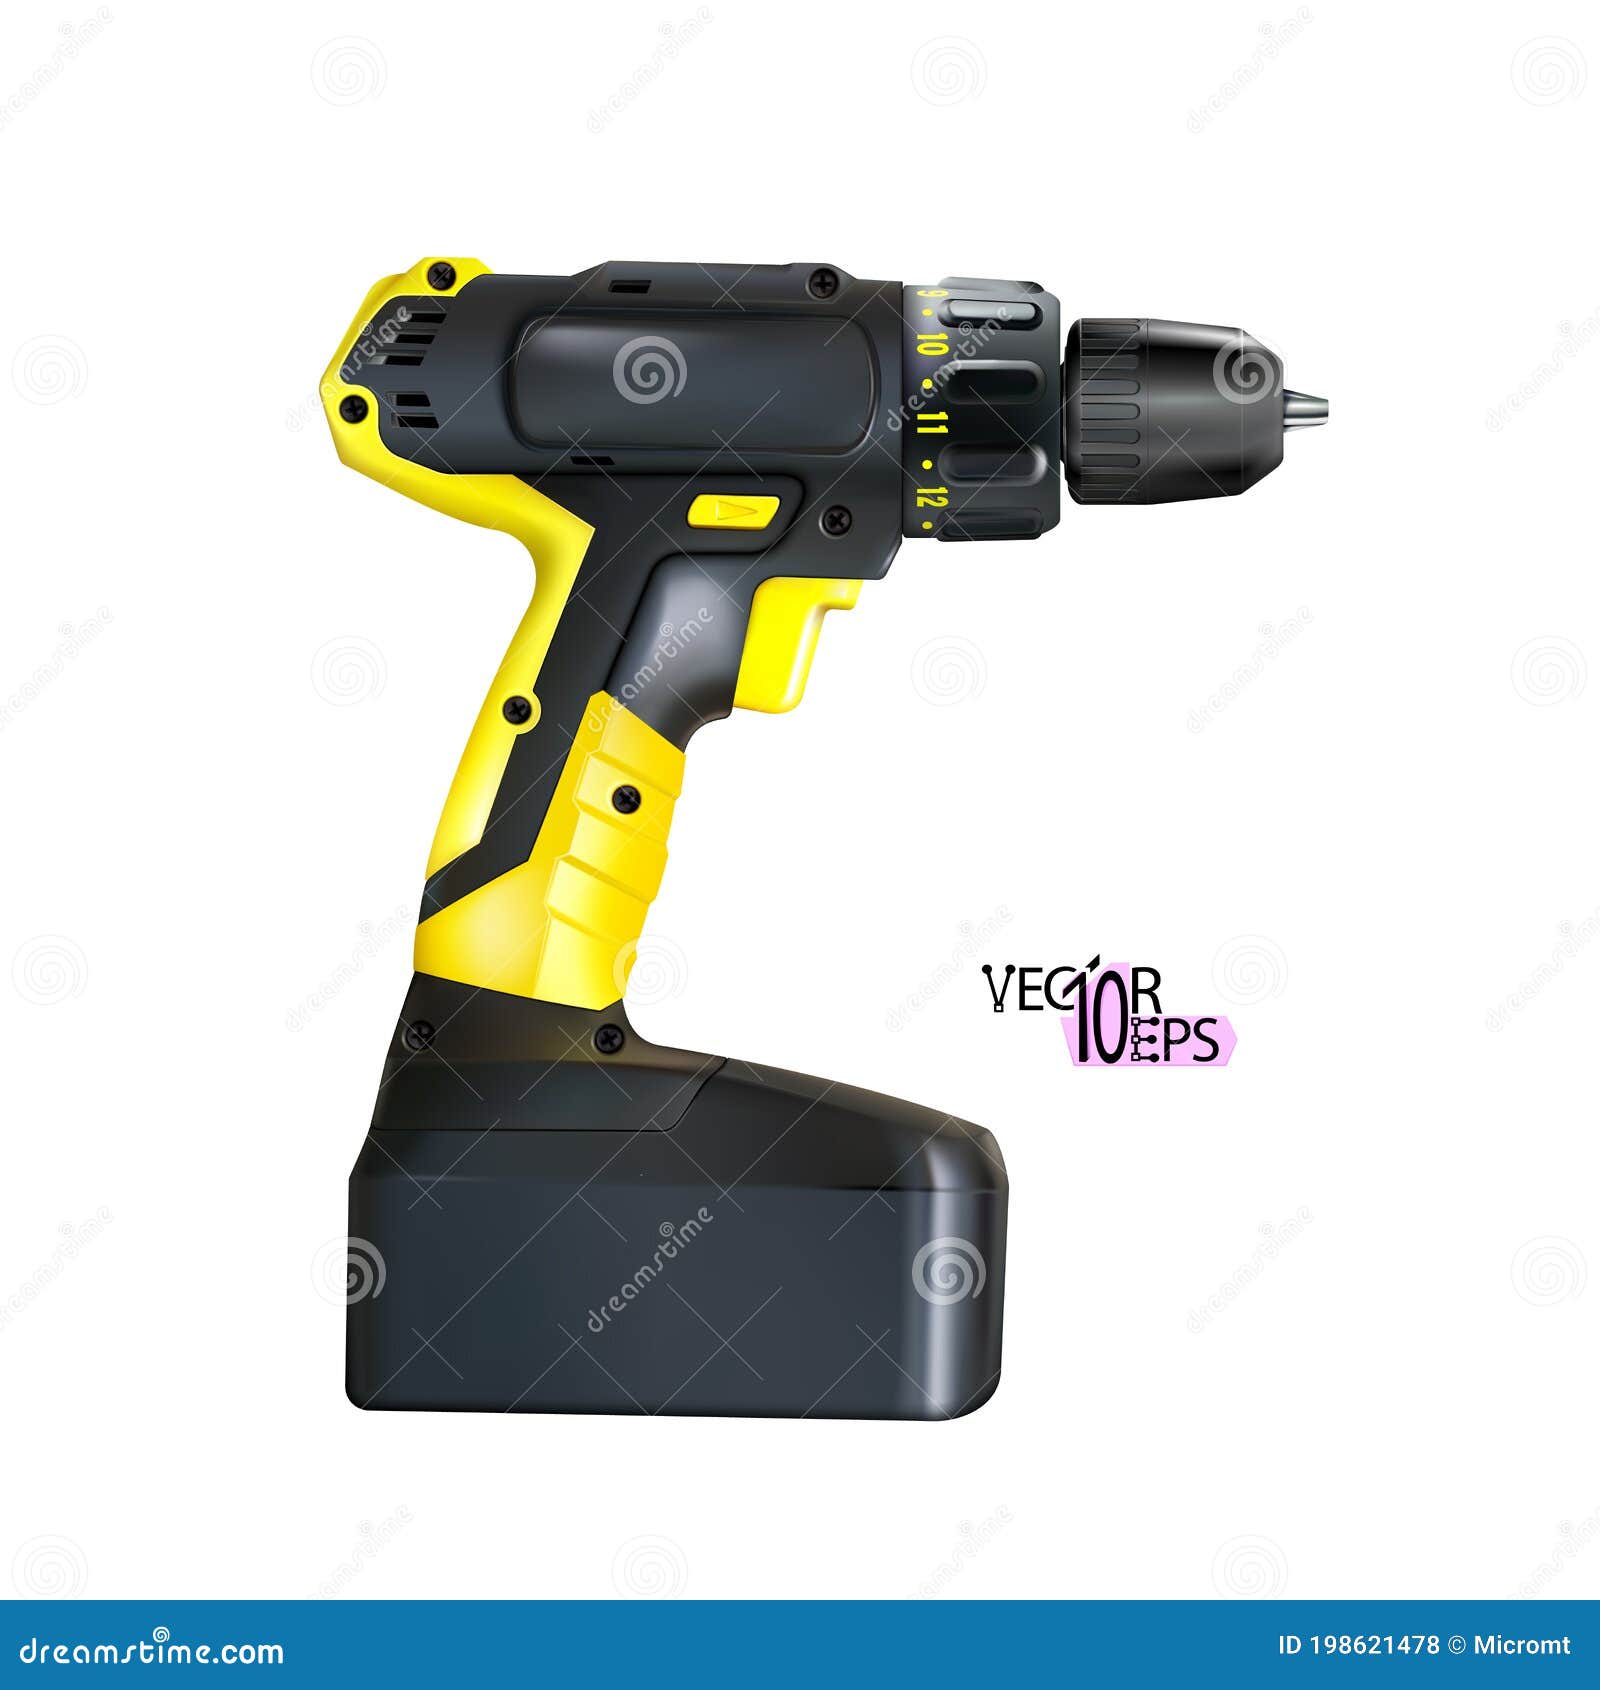 Realistic Yellow Black Cordless Drill Professional Tool Isolated on ...